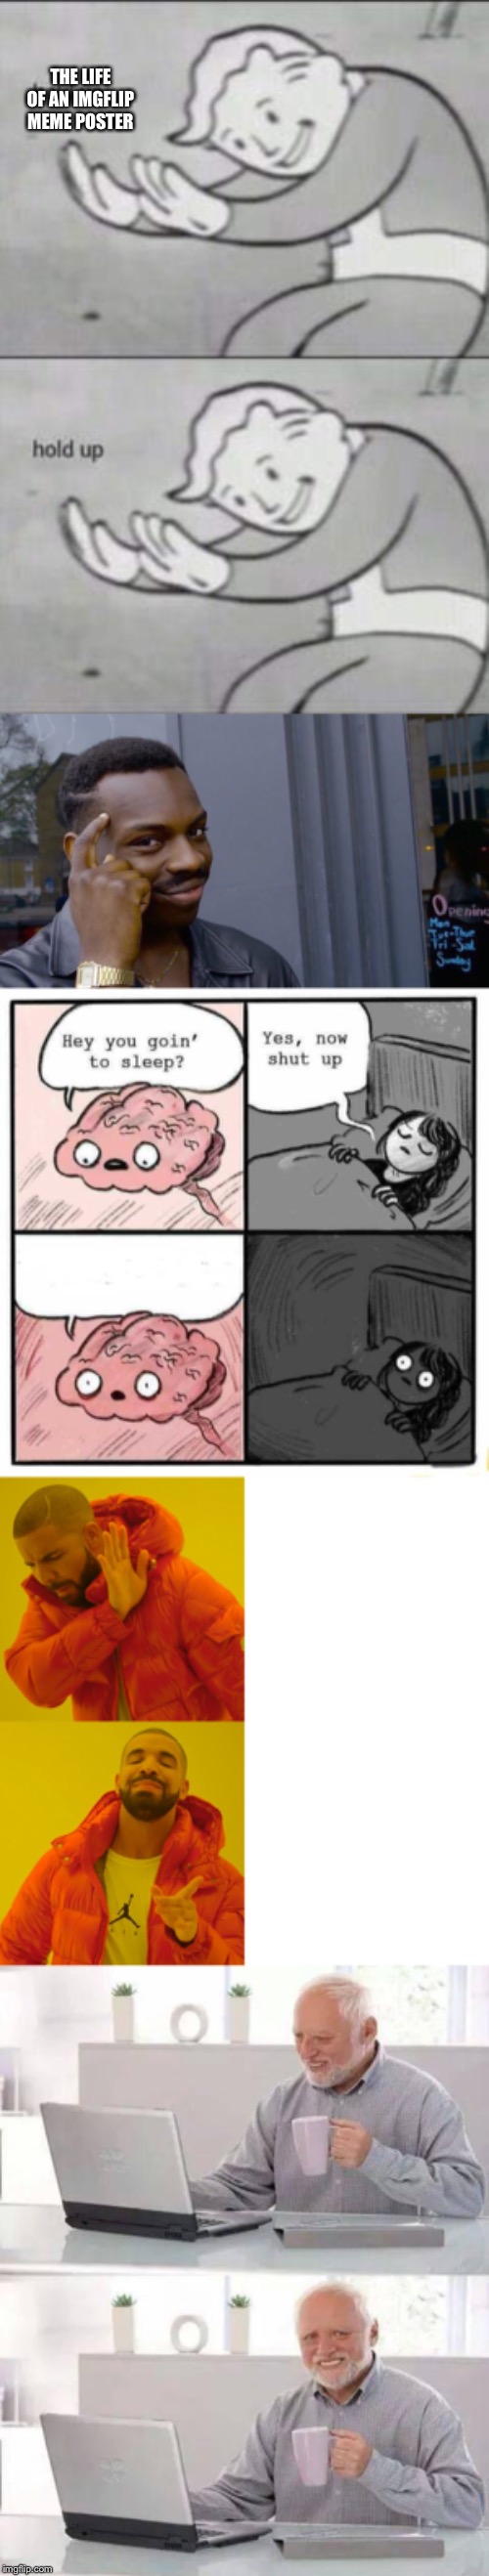 THE LIFE OF AN IMGFLIP MEME POSTER | image tagged in memes,hide the pain harold,roll safe think about it,hey you going to sleep,fallout hold up,drake hotline bling | made w/ Imgflip meme maker